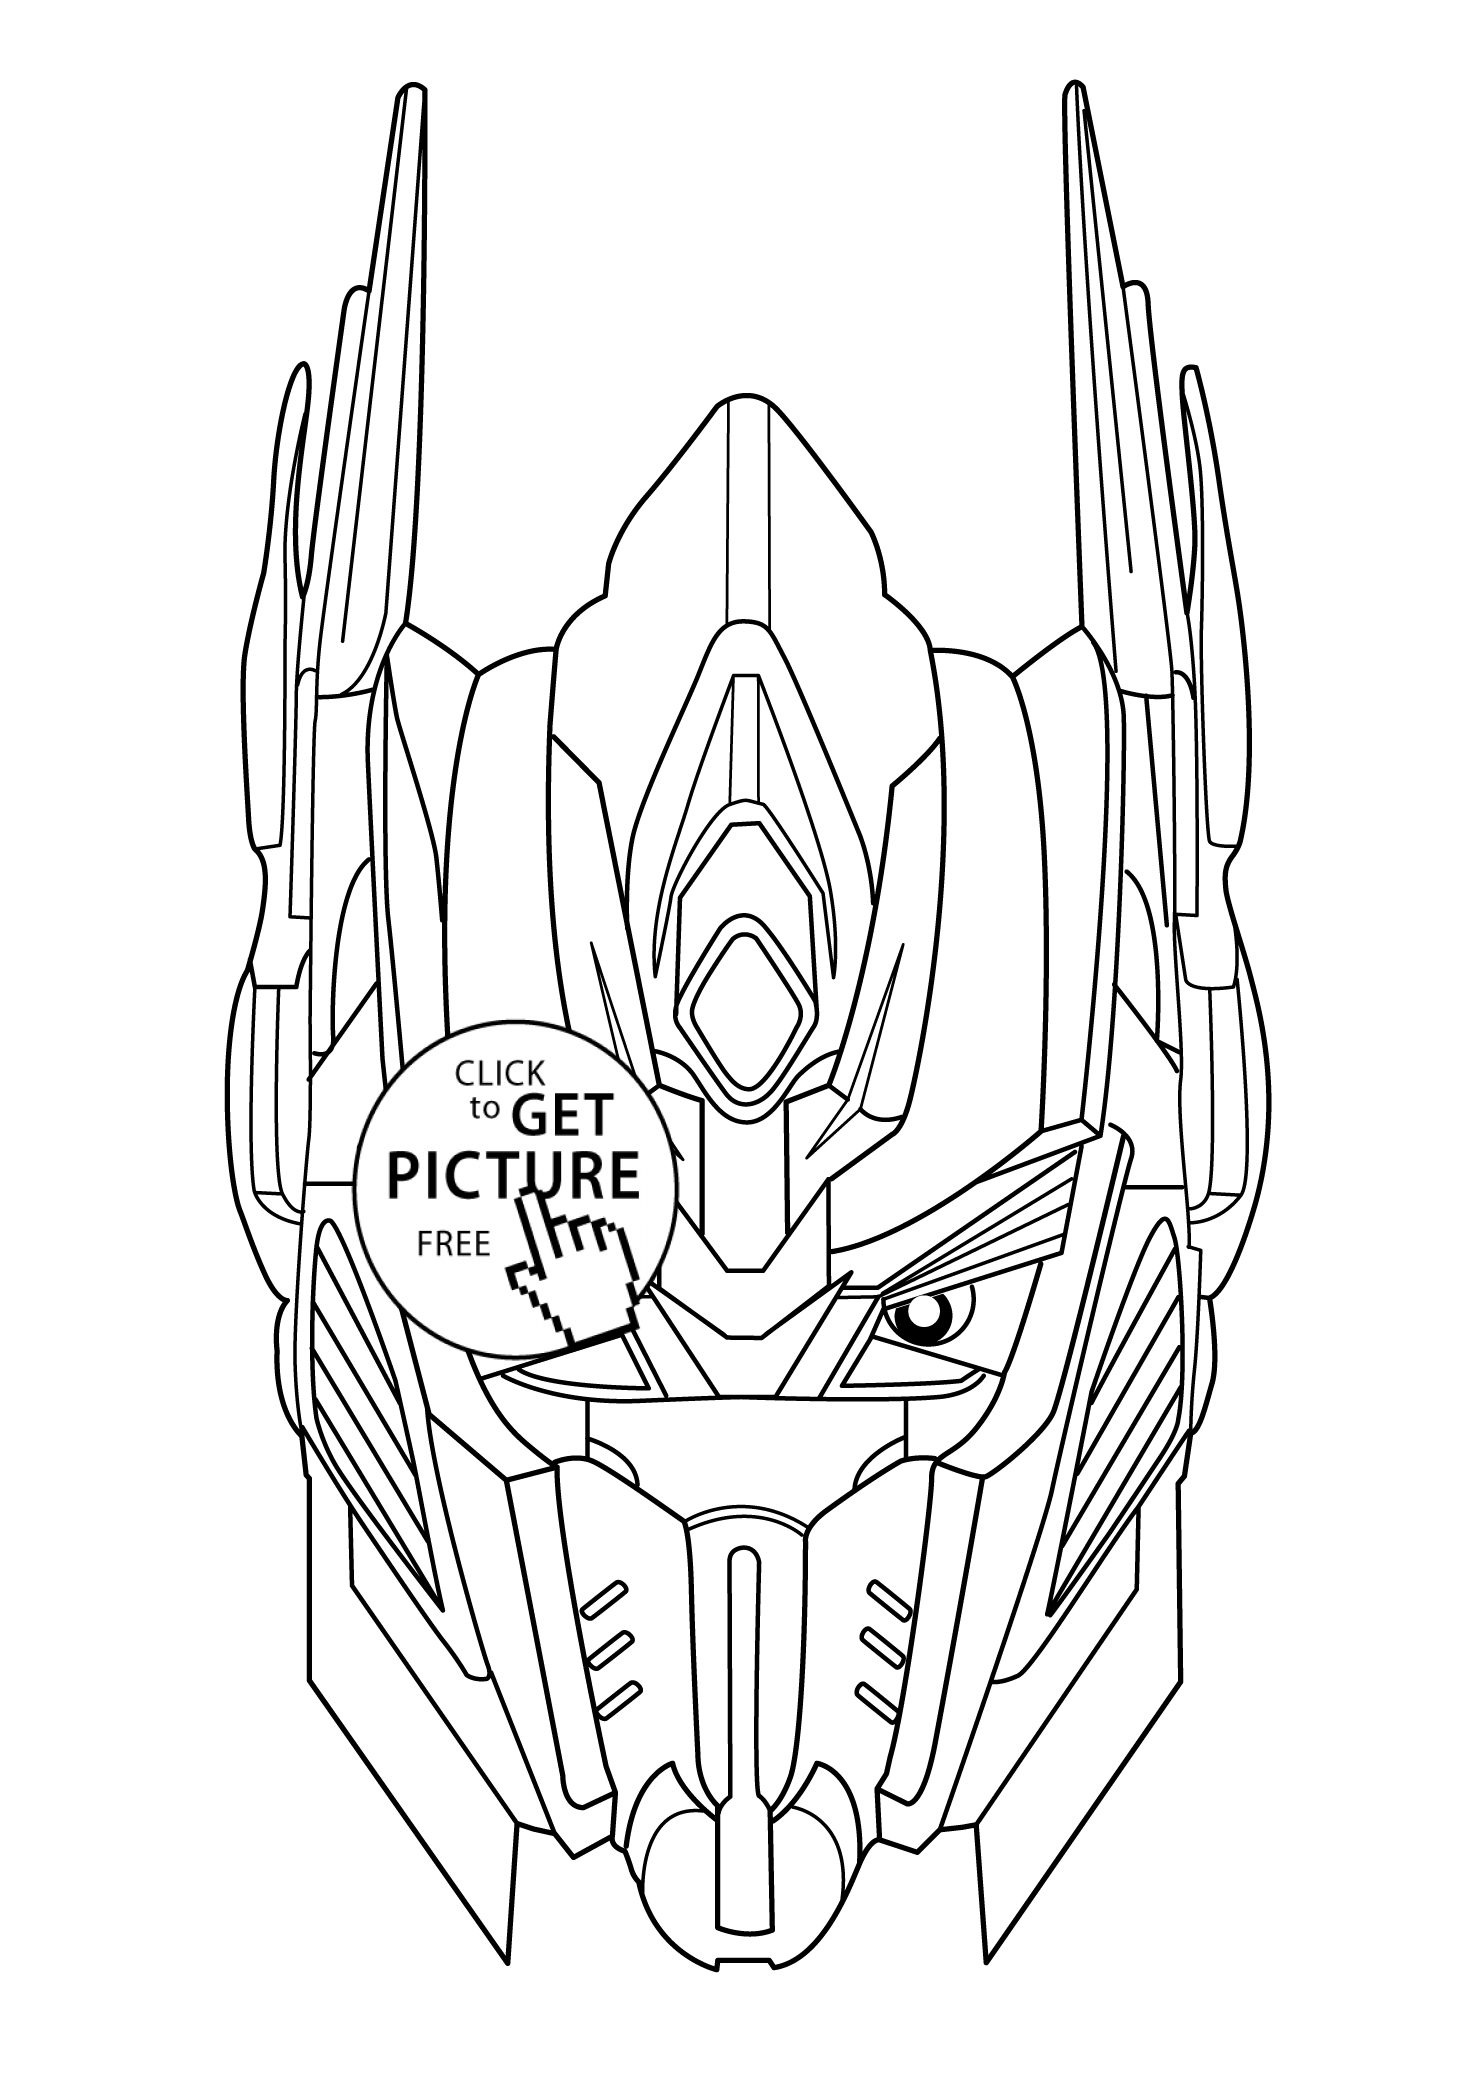 Transformers coloring pages for kids free printable | coloing ...